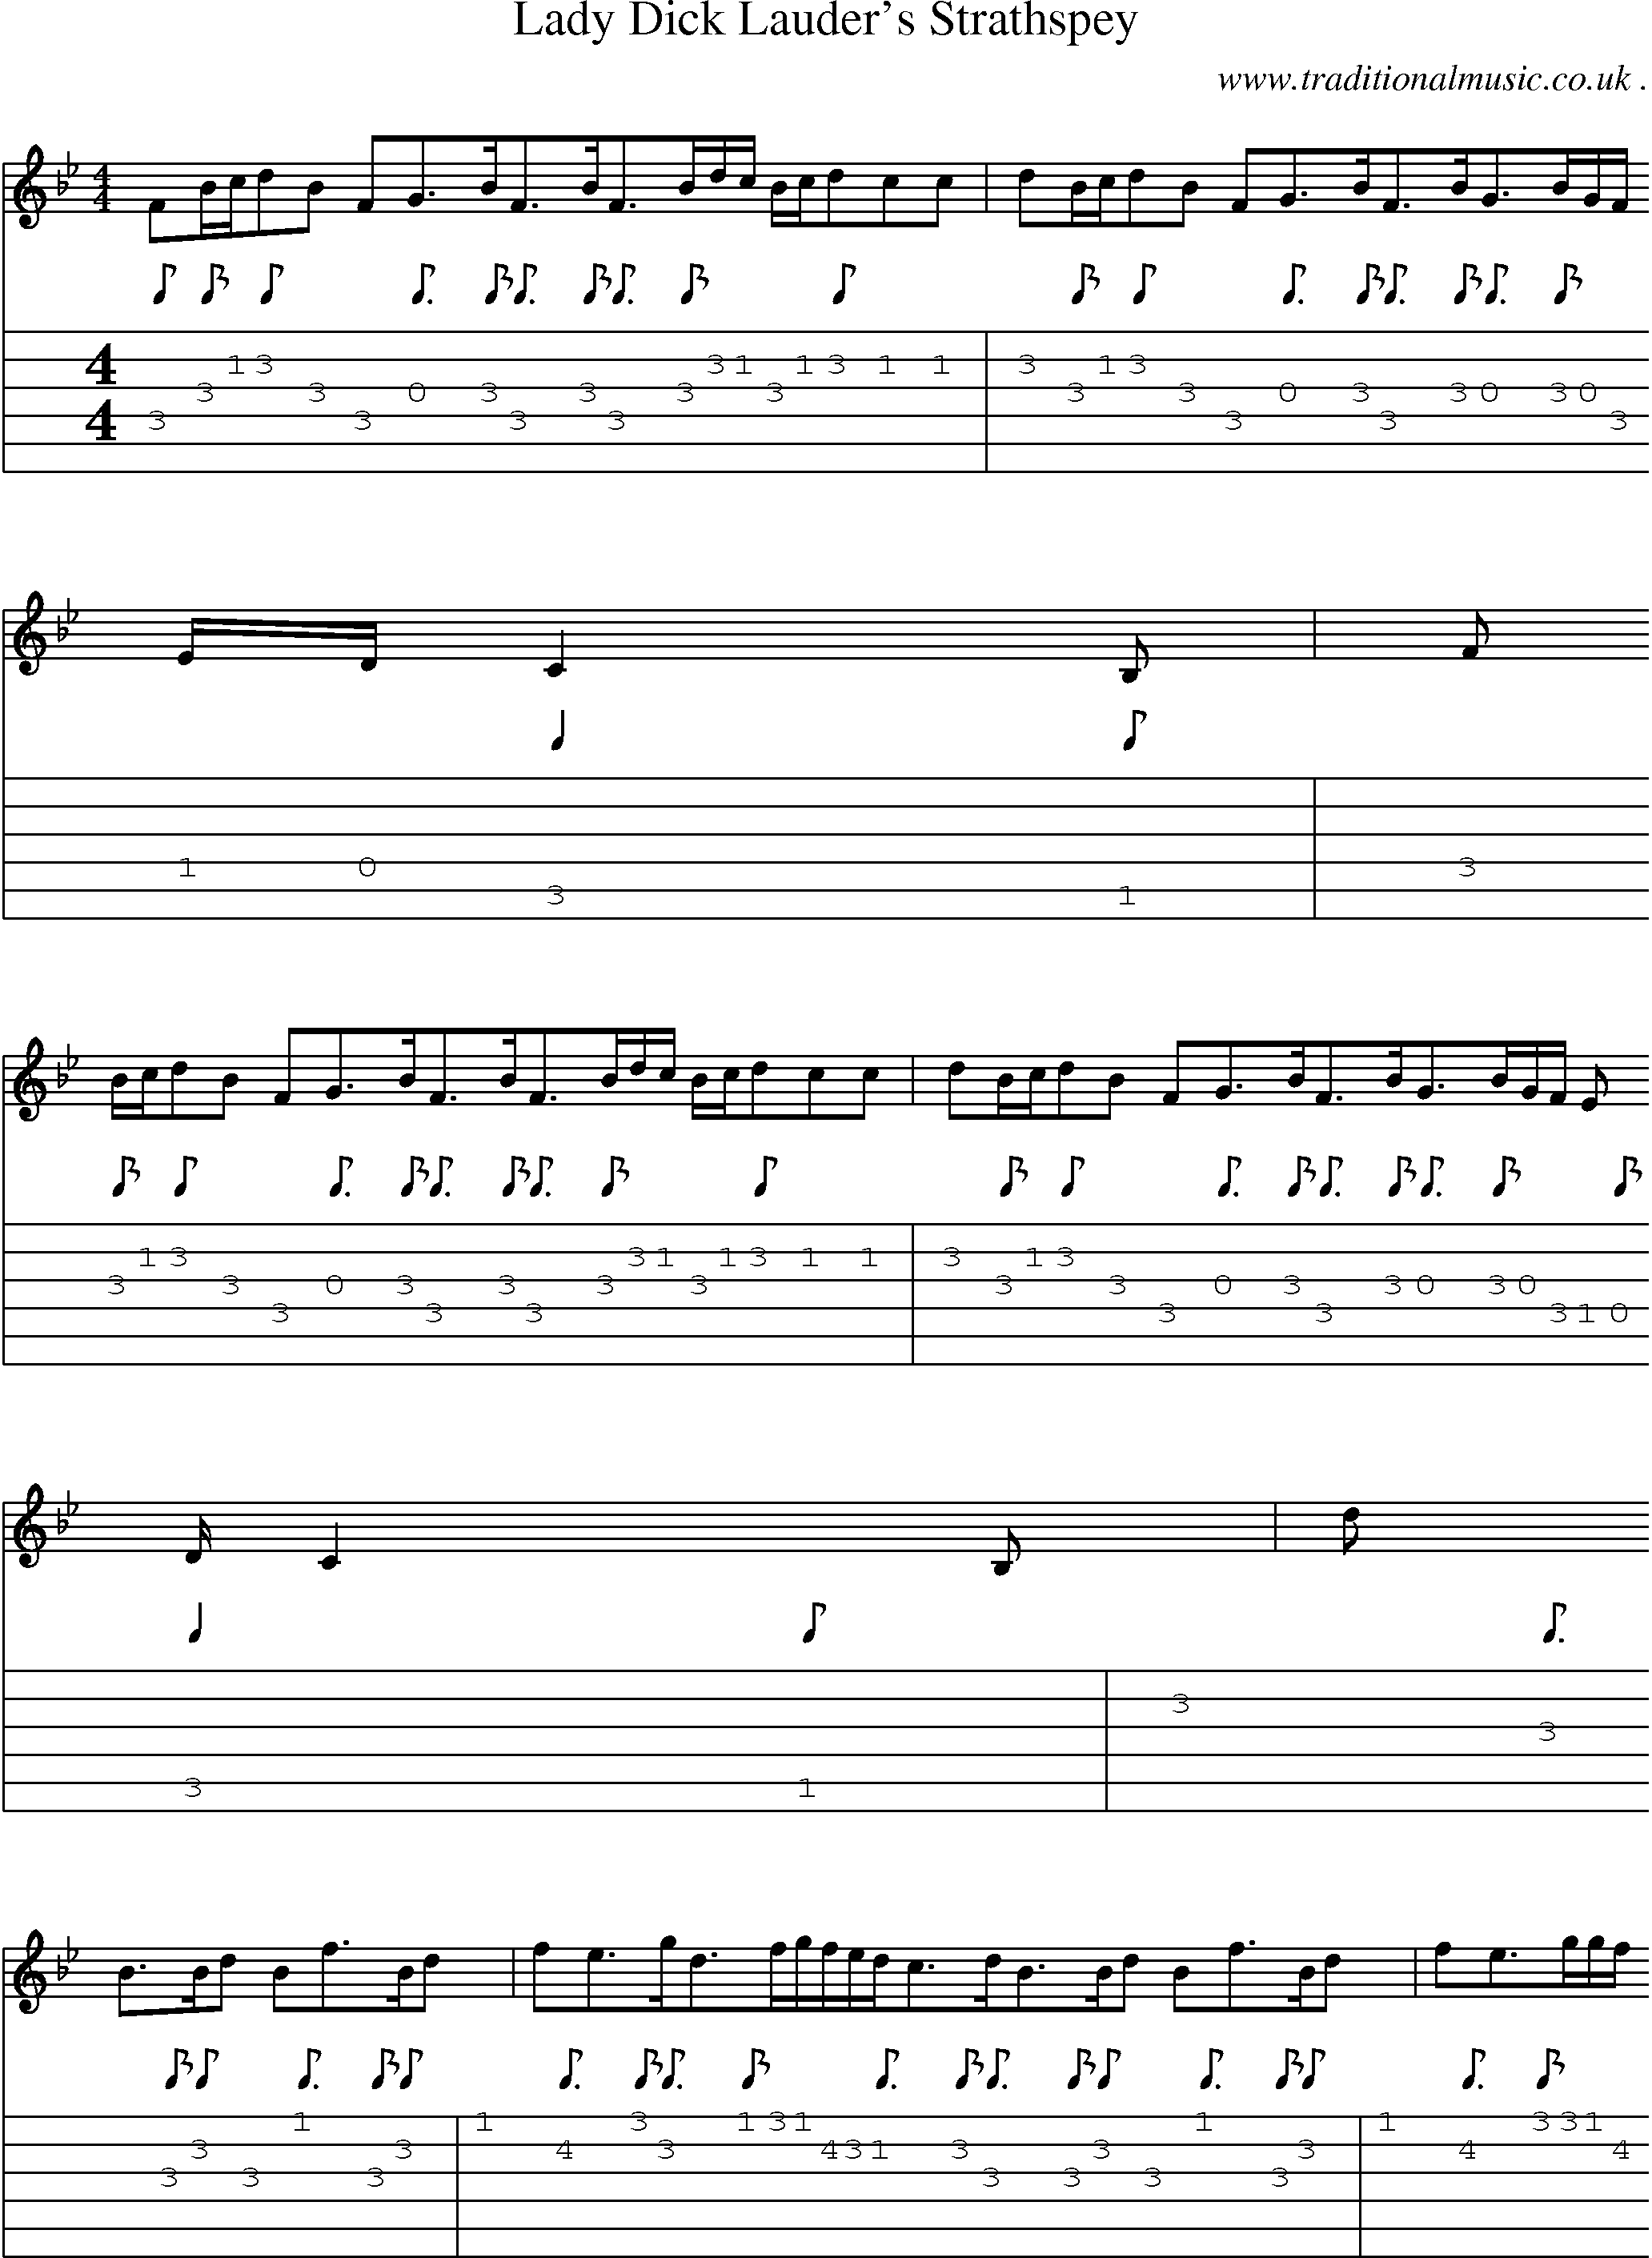 Sheet-Music and Guitar Tabs for Lady Dick Lauders Strathspey